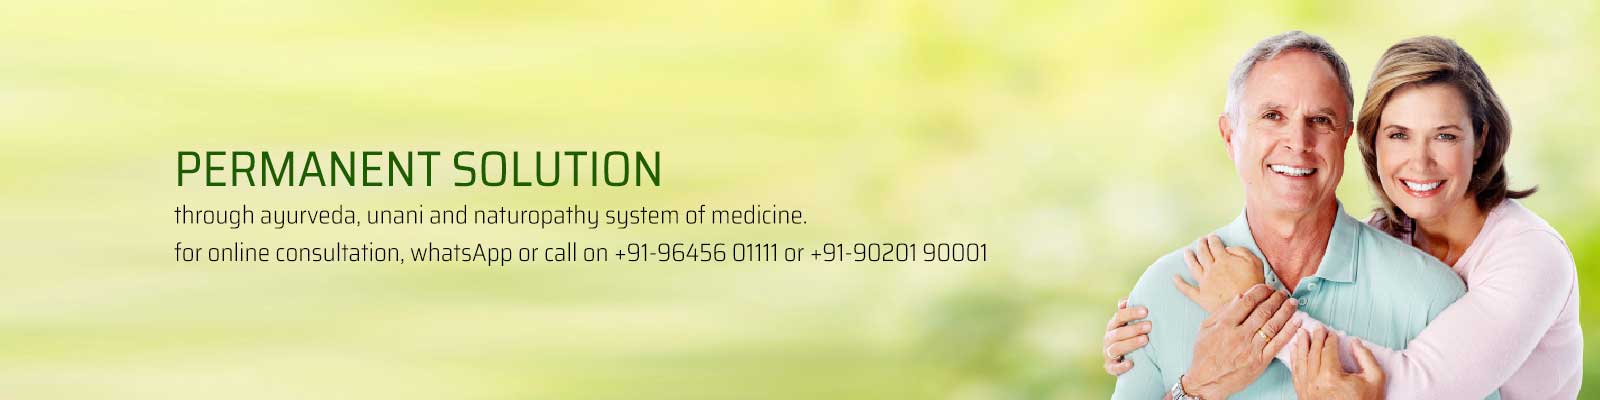 AYURVEDA TREATMENT FOR IMPAIRED EJACULATION